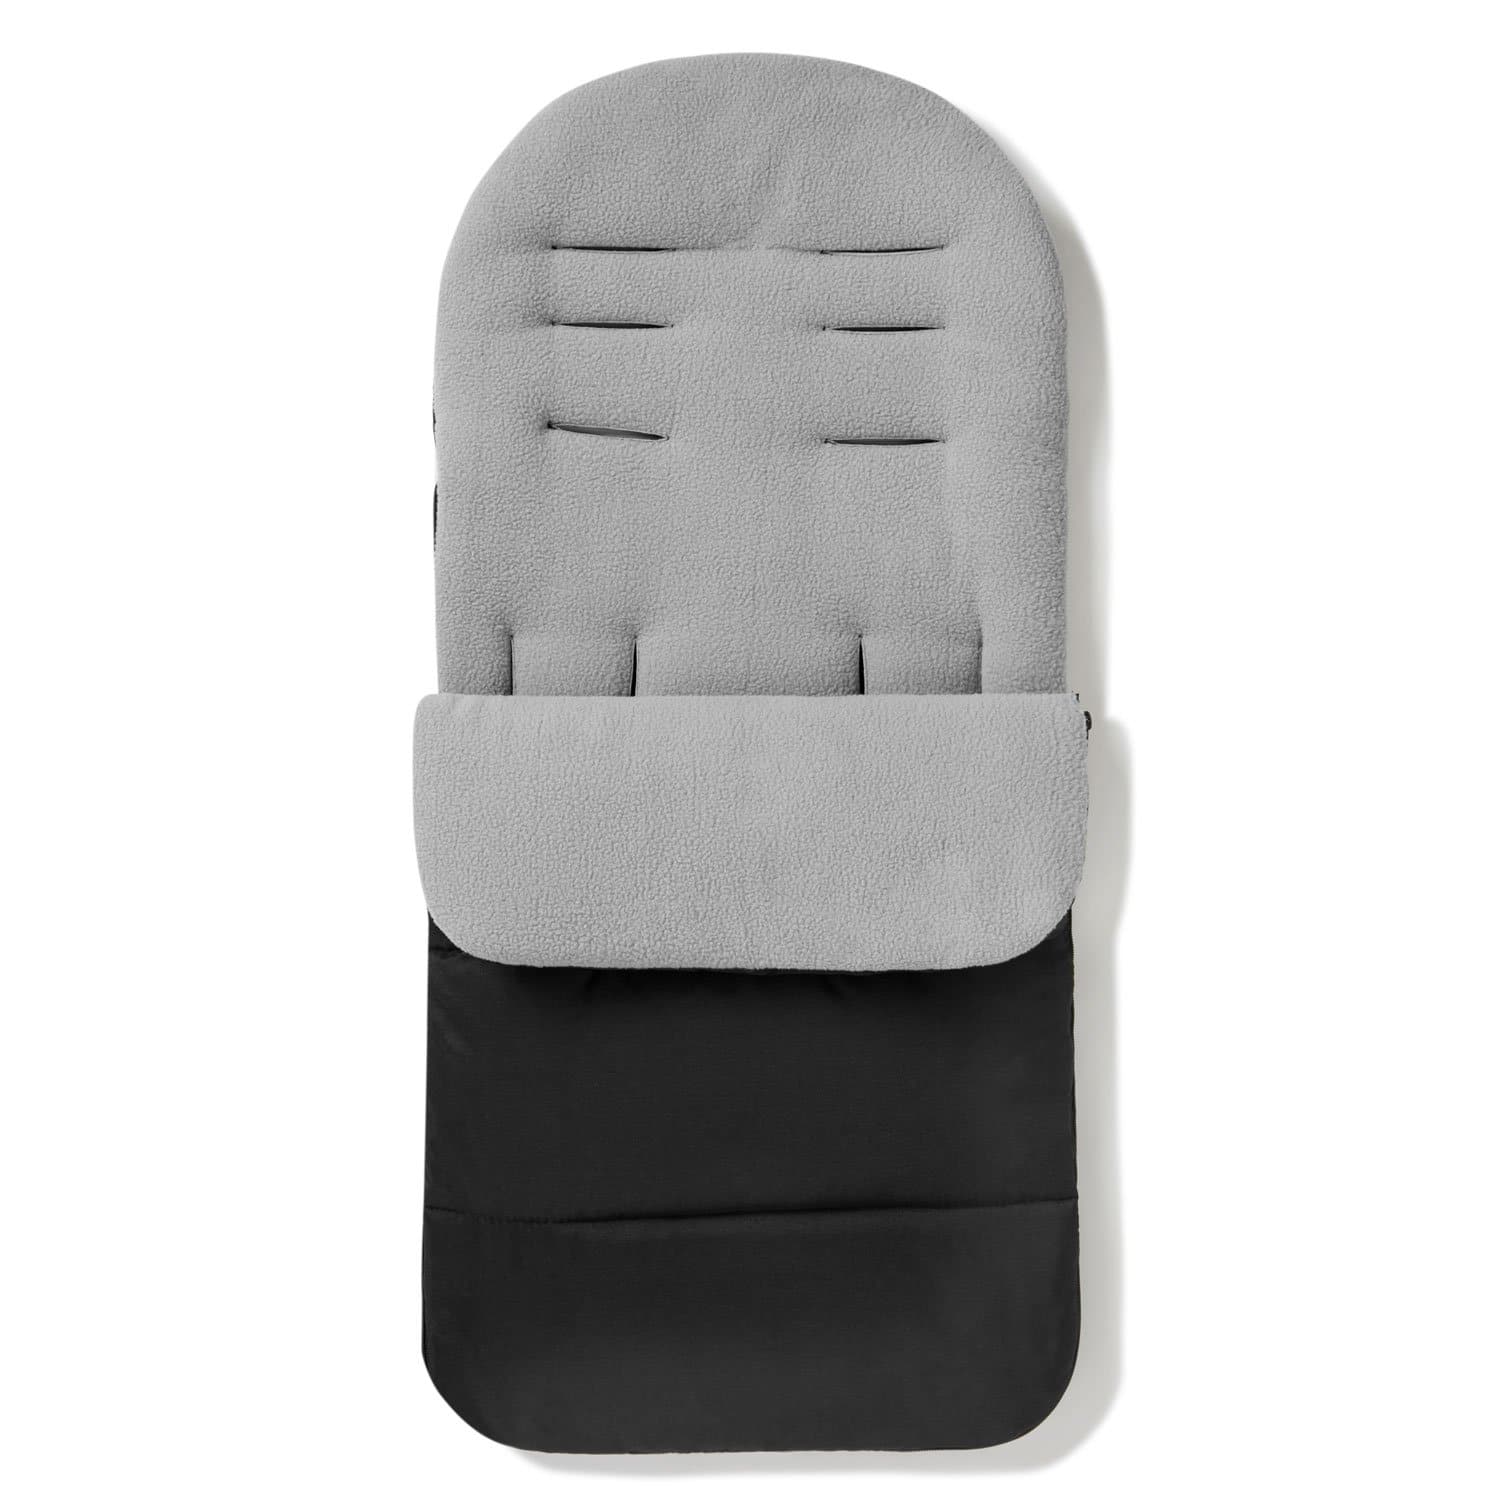 Universal Premium Pushchair Footmuff / Cosy Toes - Fits All Pushchairs / Prams And Buggies - Dolphin Grey / Fits All Models | For Your Little One